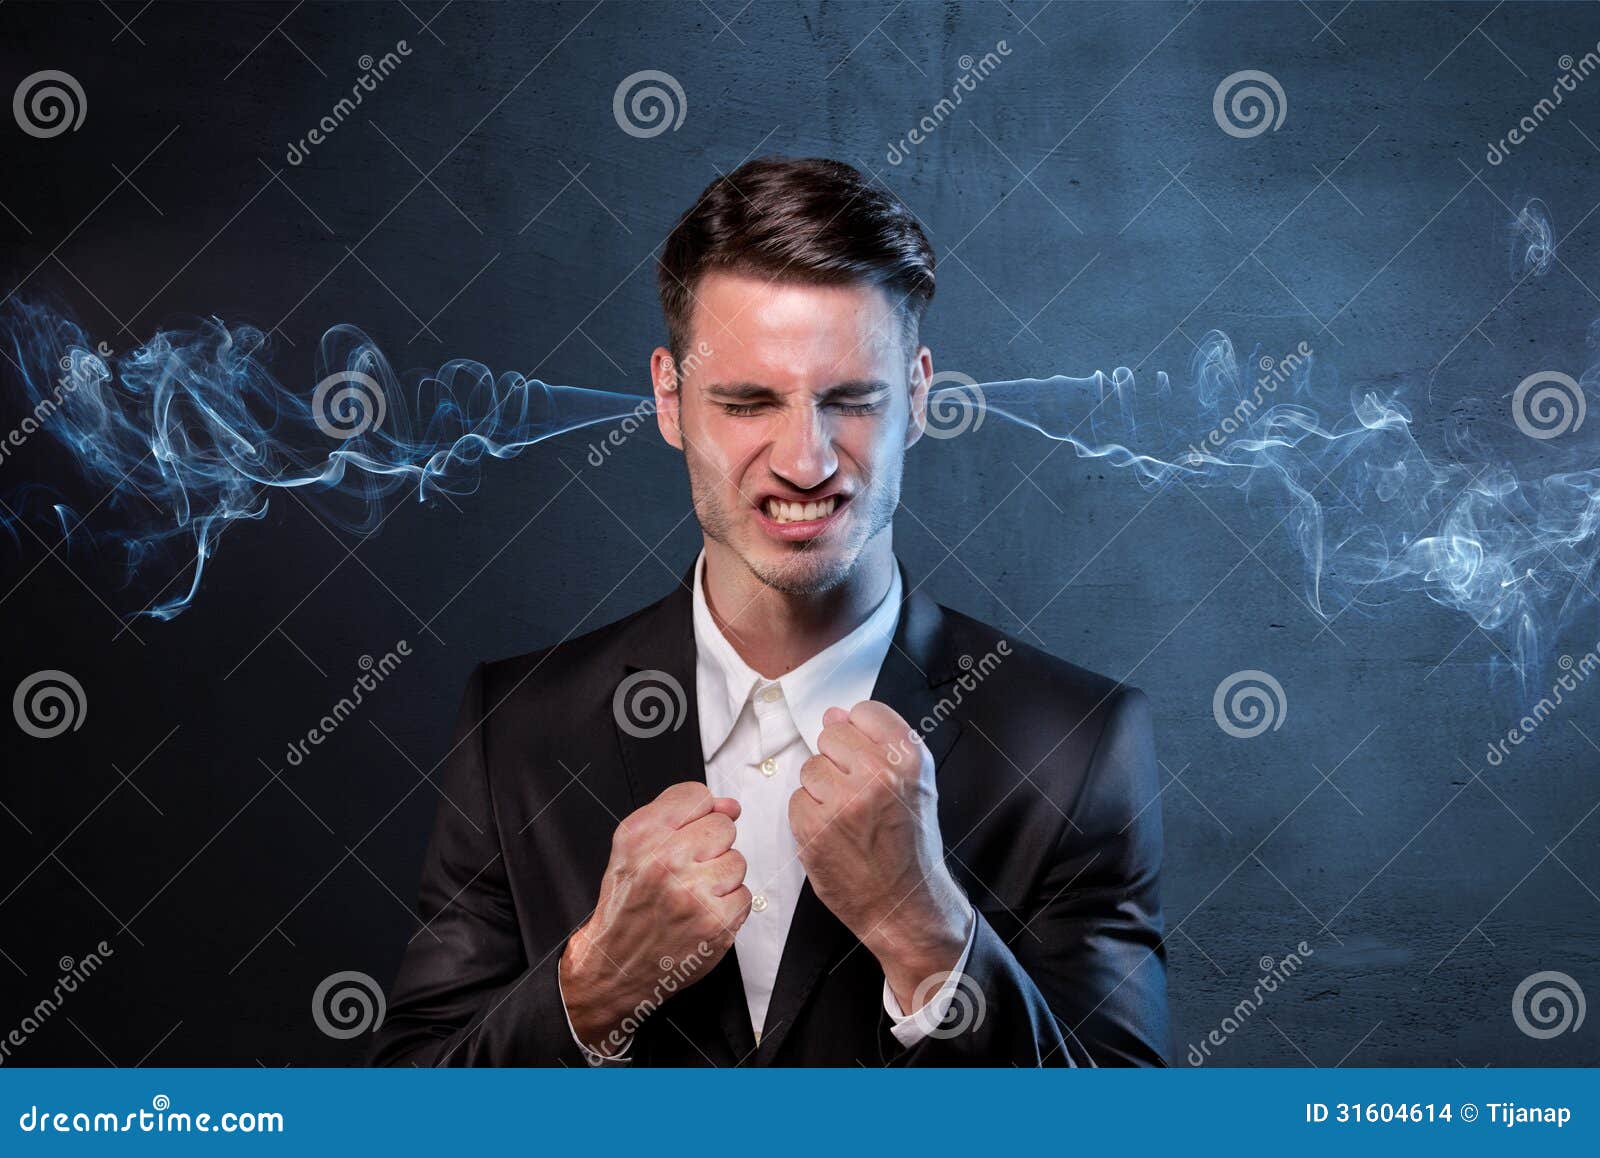 businessman smoking with anger